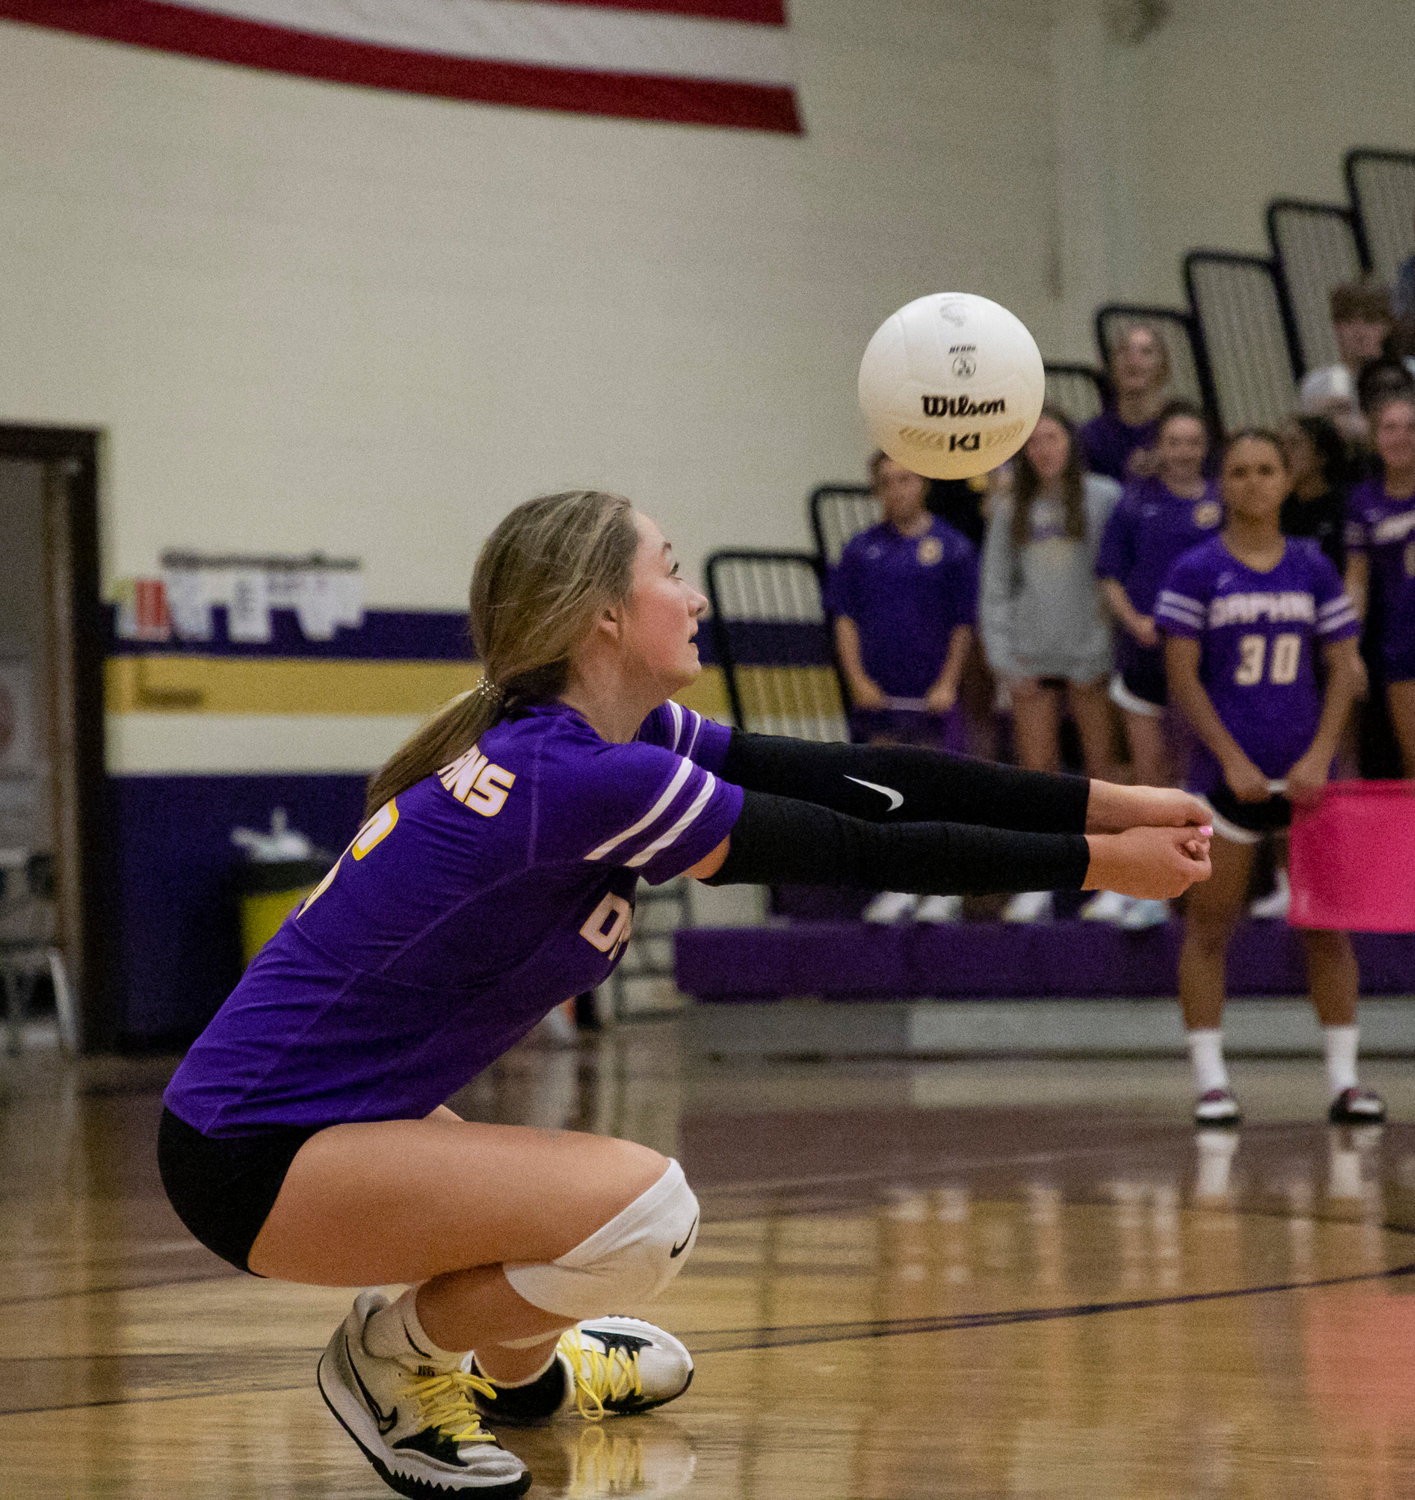 Trojan freshman outside hitter Ella Lomax dives to receive a serve in the third set of Daphne’s area match Tuesday night against McGill-Toolen at home.